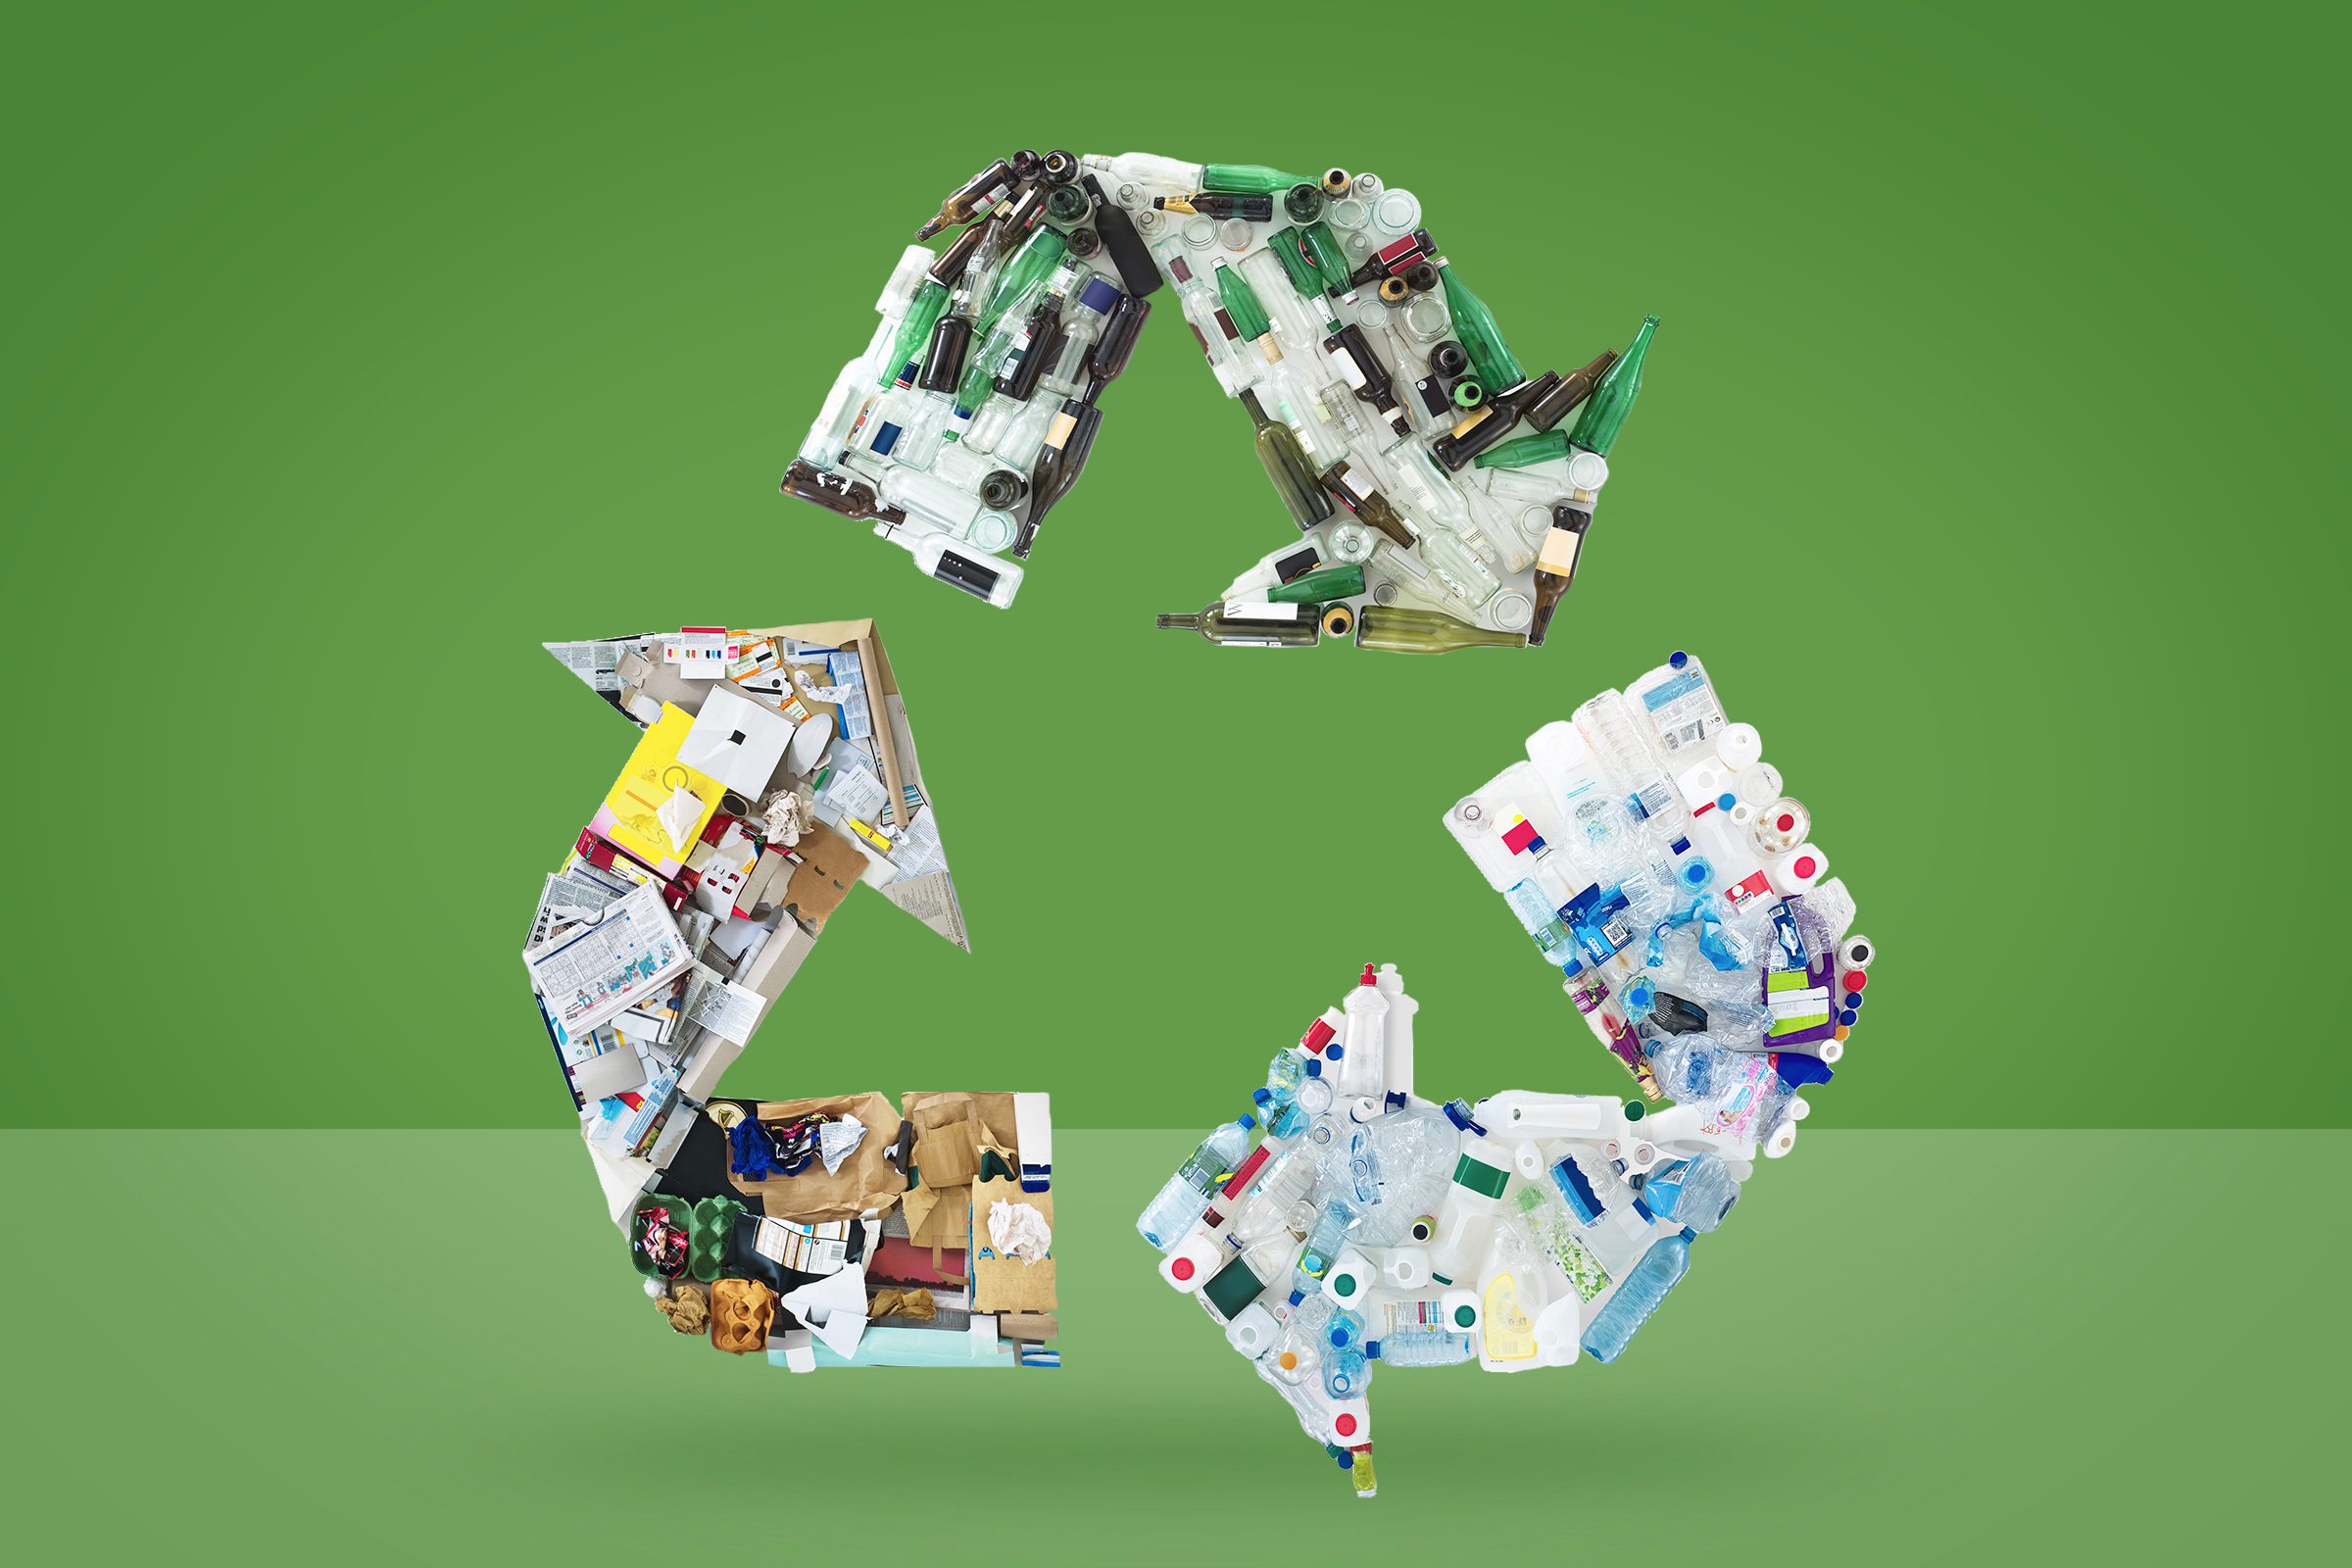 Most materials are recyclable, so why can't children's toys be sustainable?